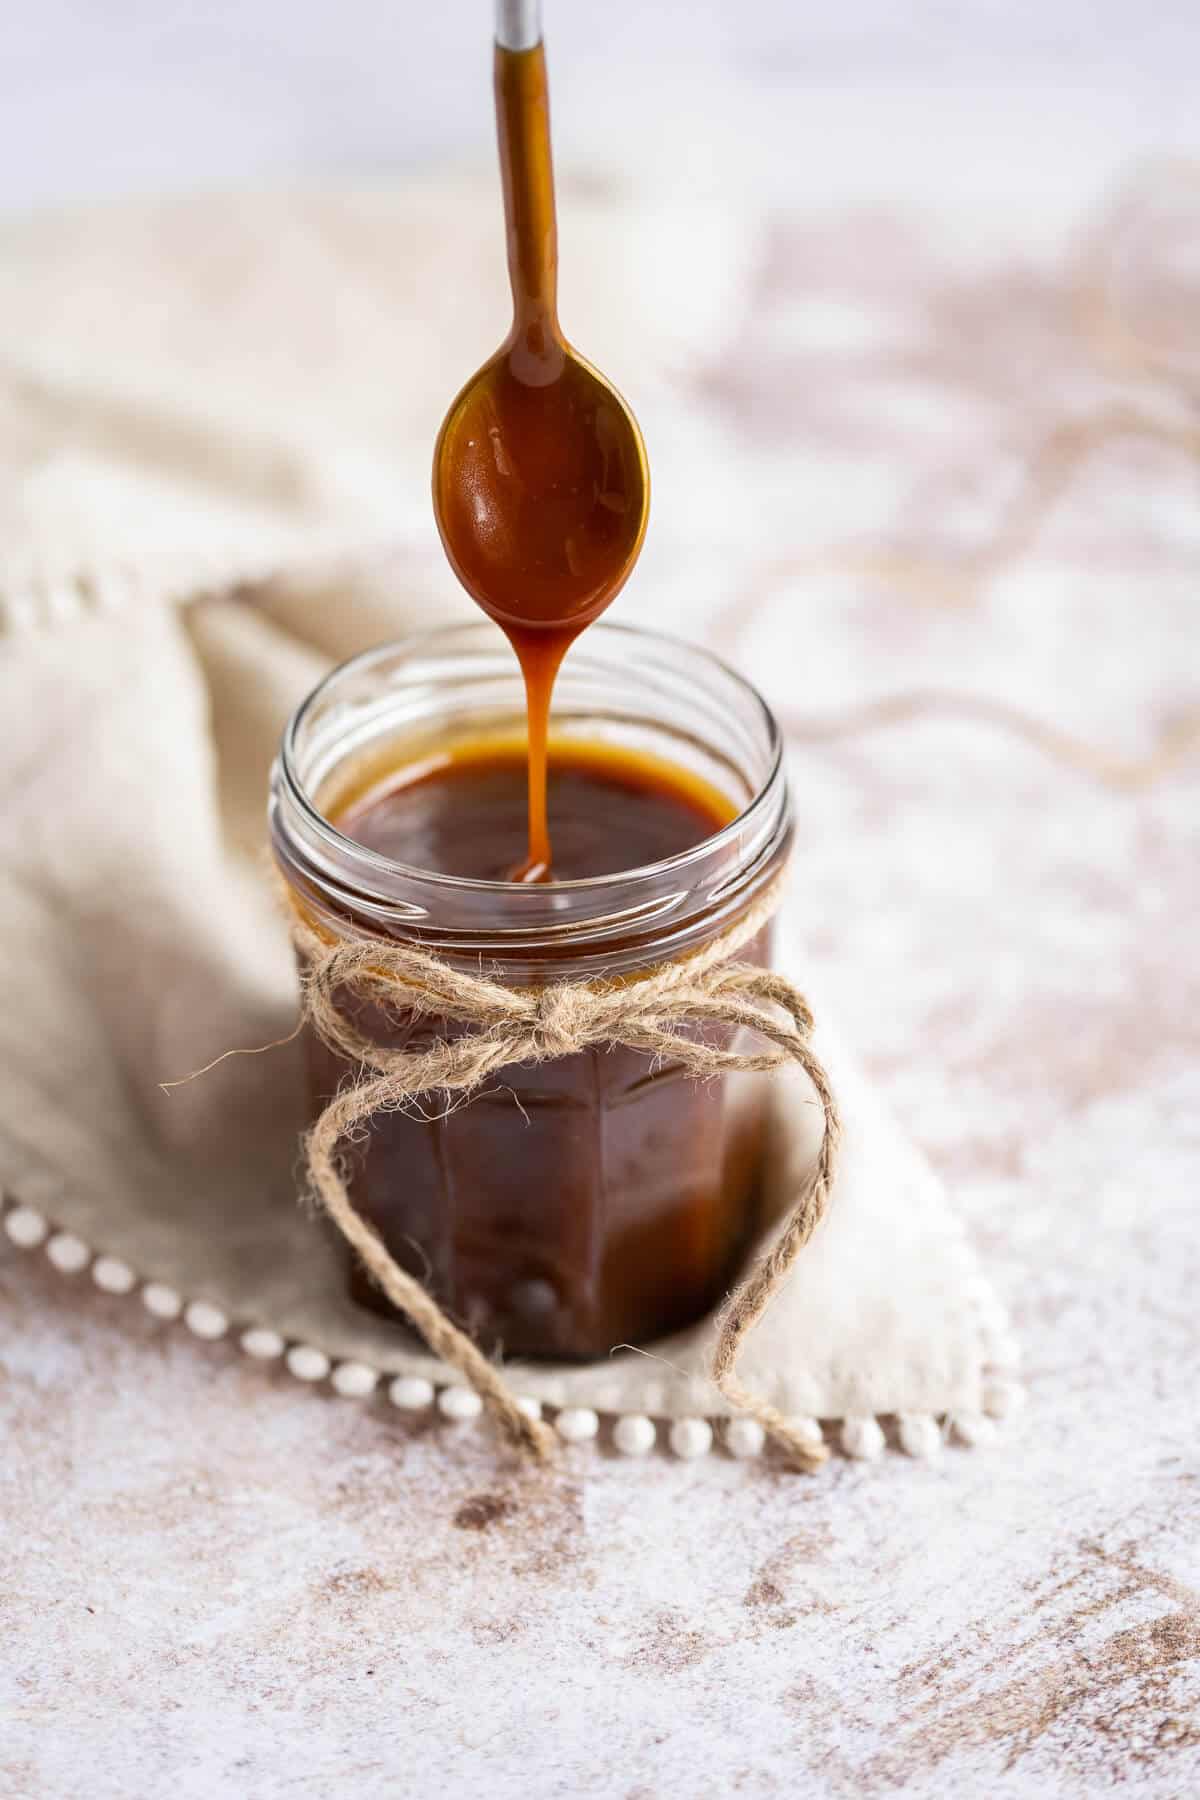 caramel sauce dripping from the spoon into its jar.